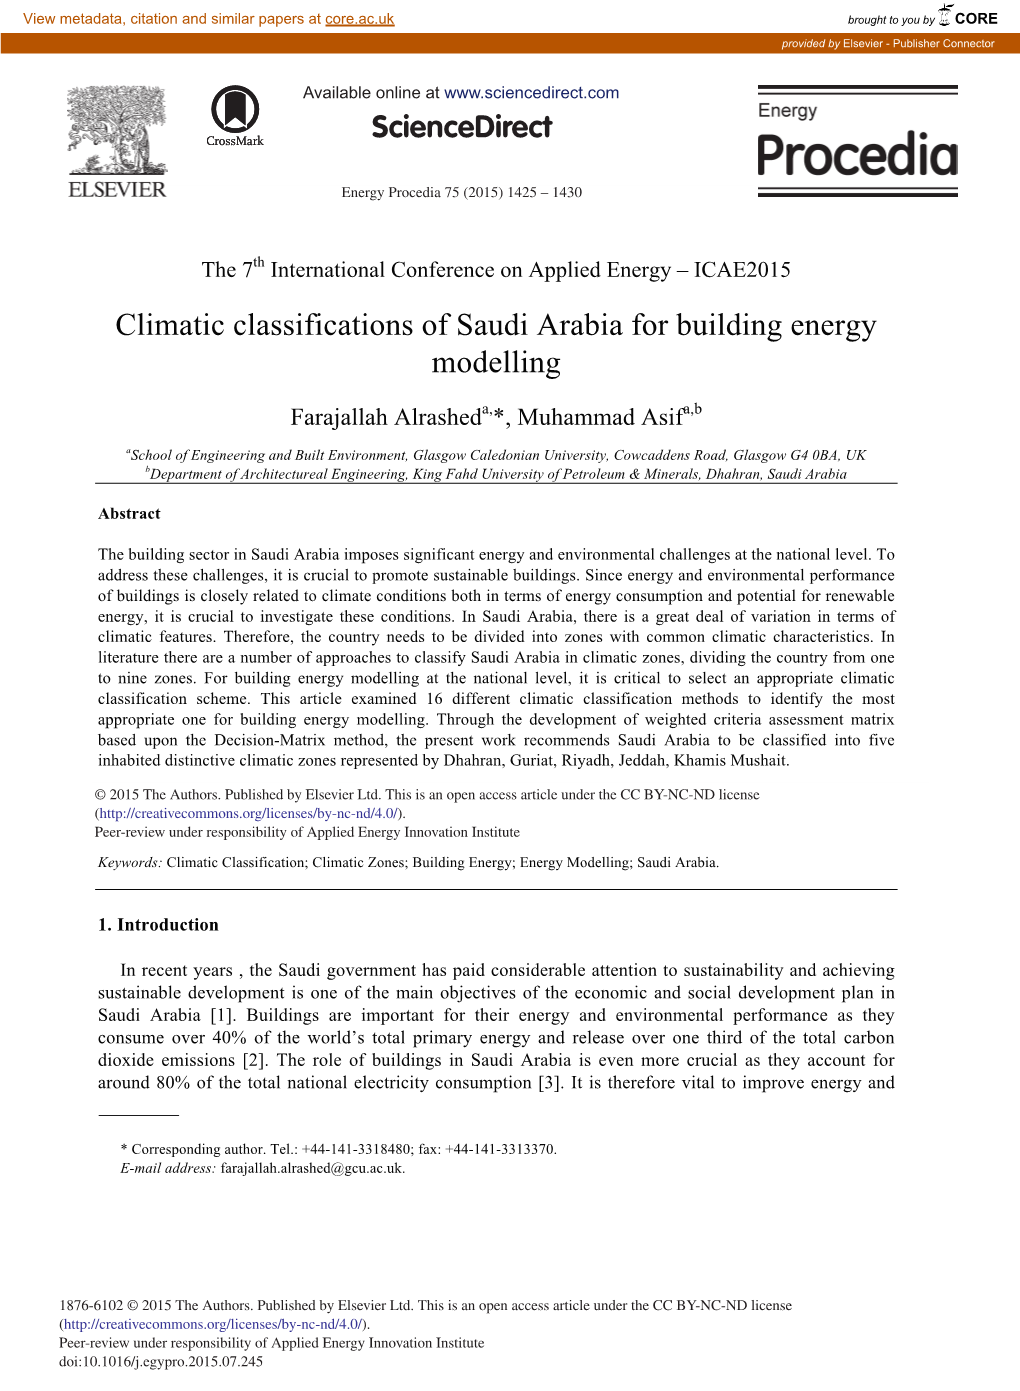 Climatic Classifications of Saudi Arabia for Building Energy Modelling